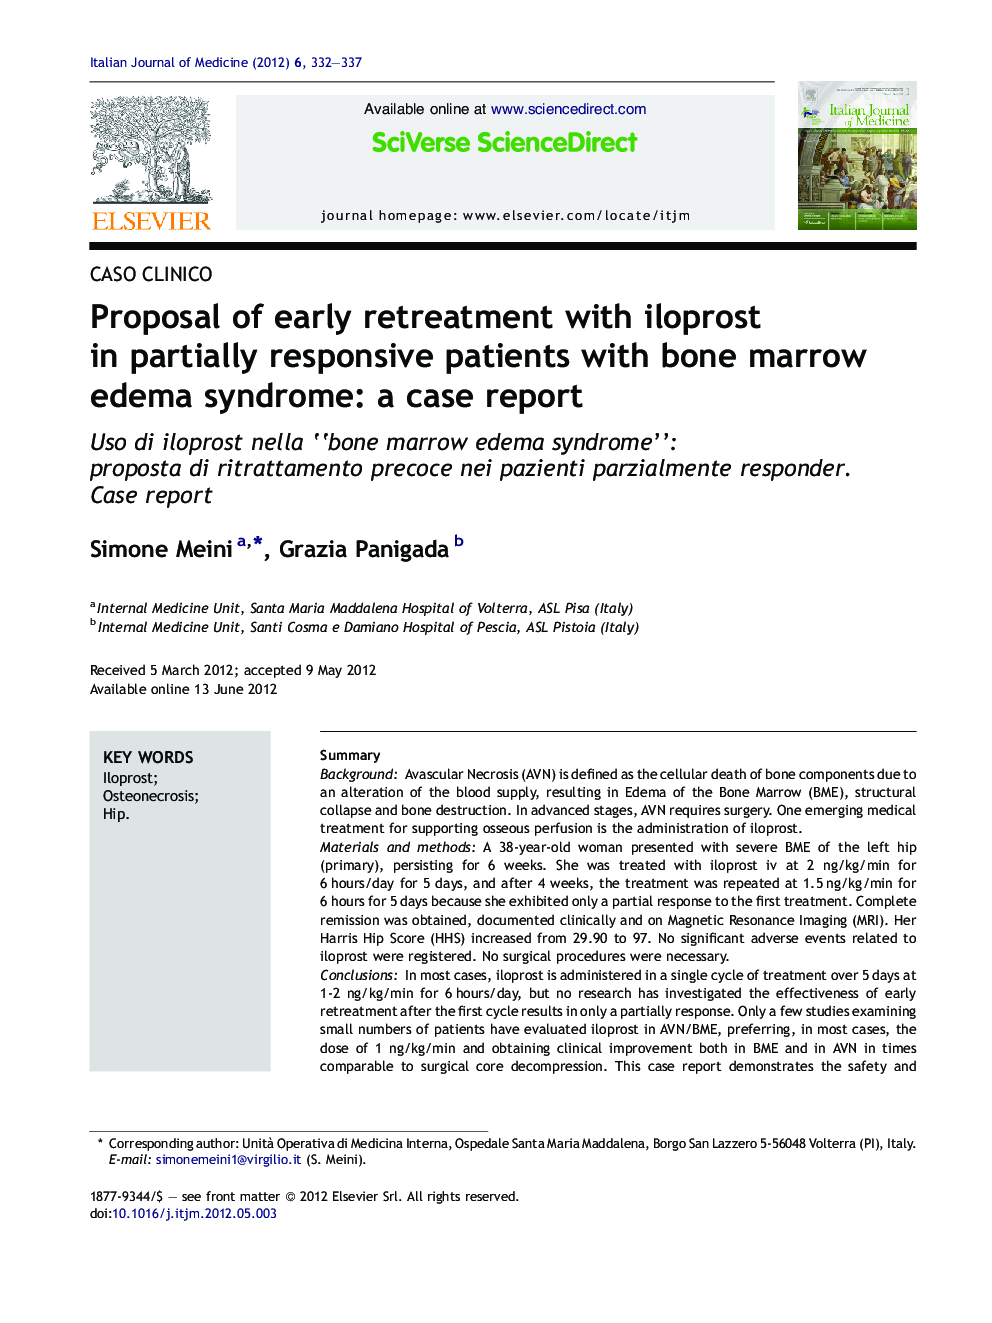 Proposal of early retreatment with iloprost in partially responsive patients with bone marrow edema syndrome: a case report